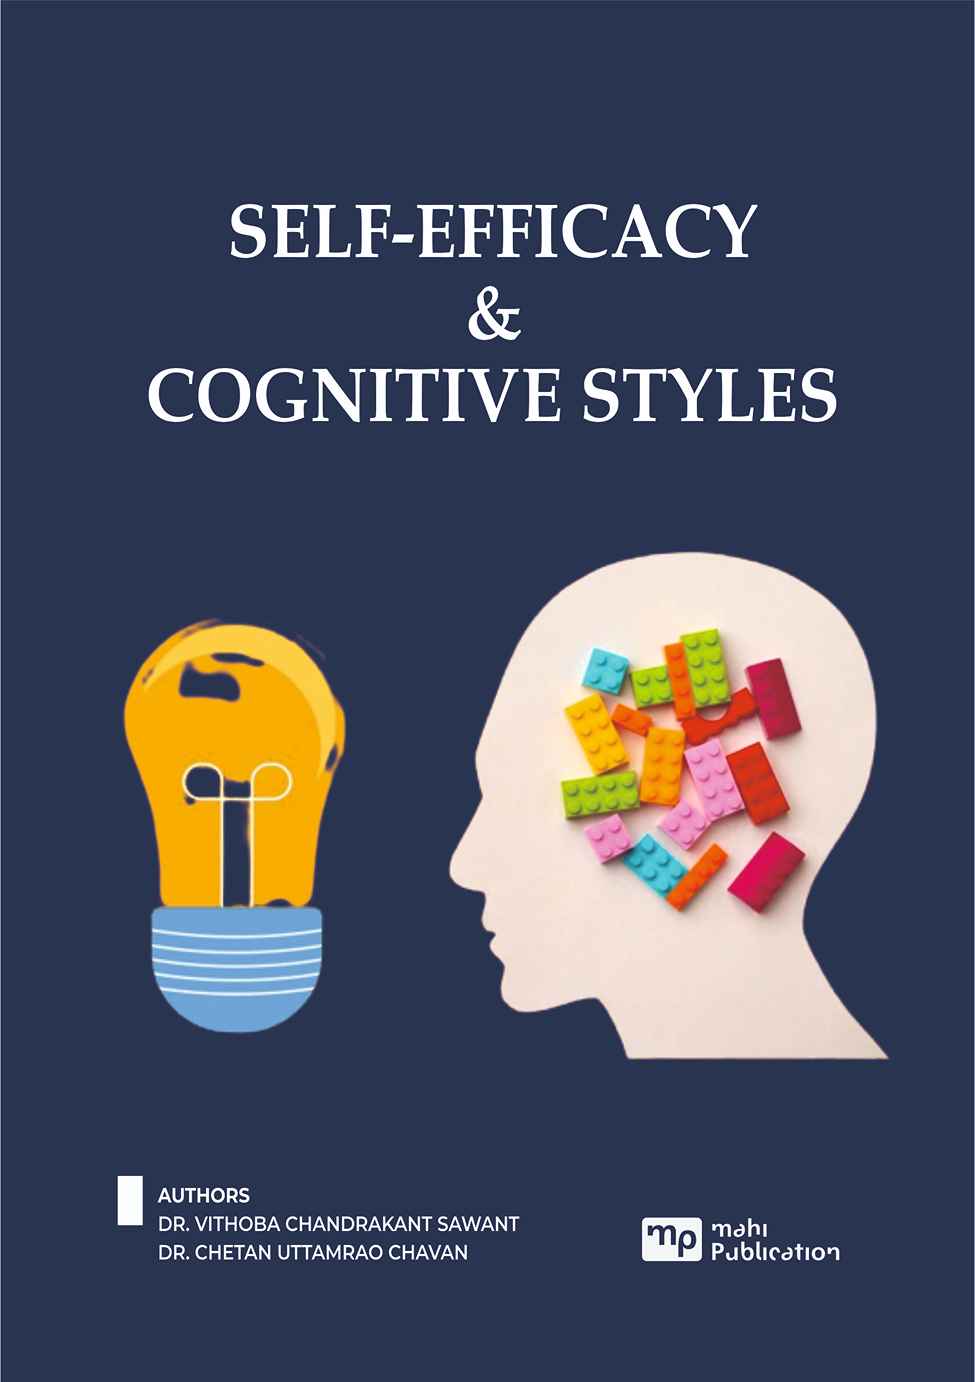 Self-Efficacy & Cognitive Styles